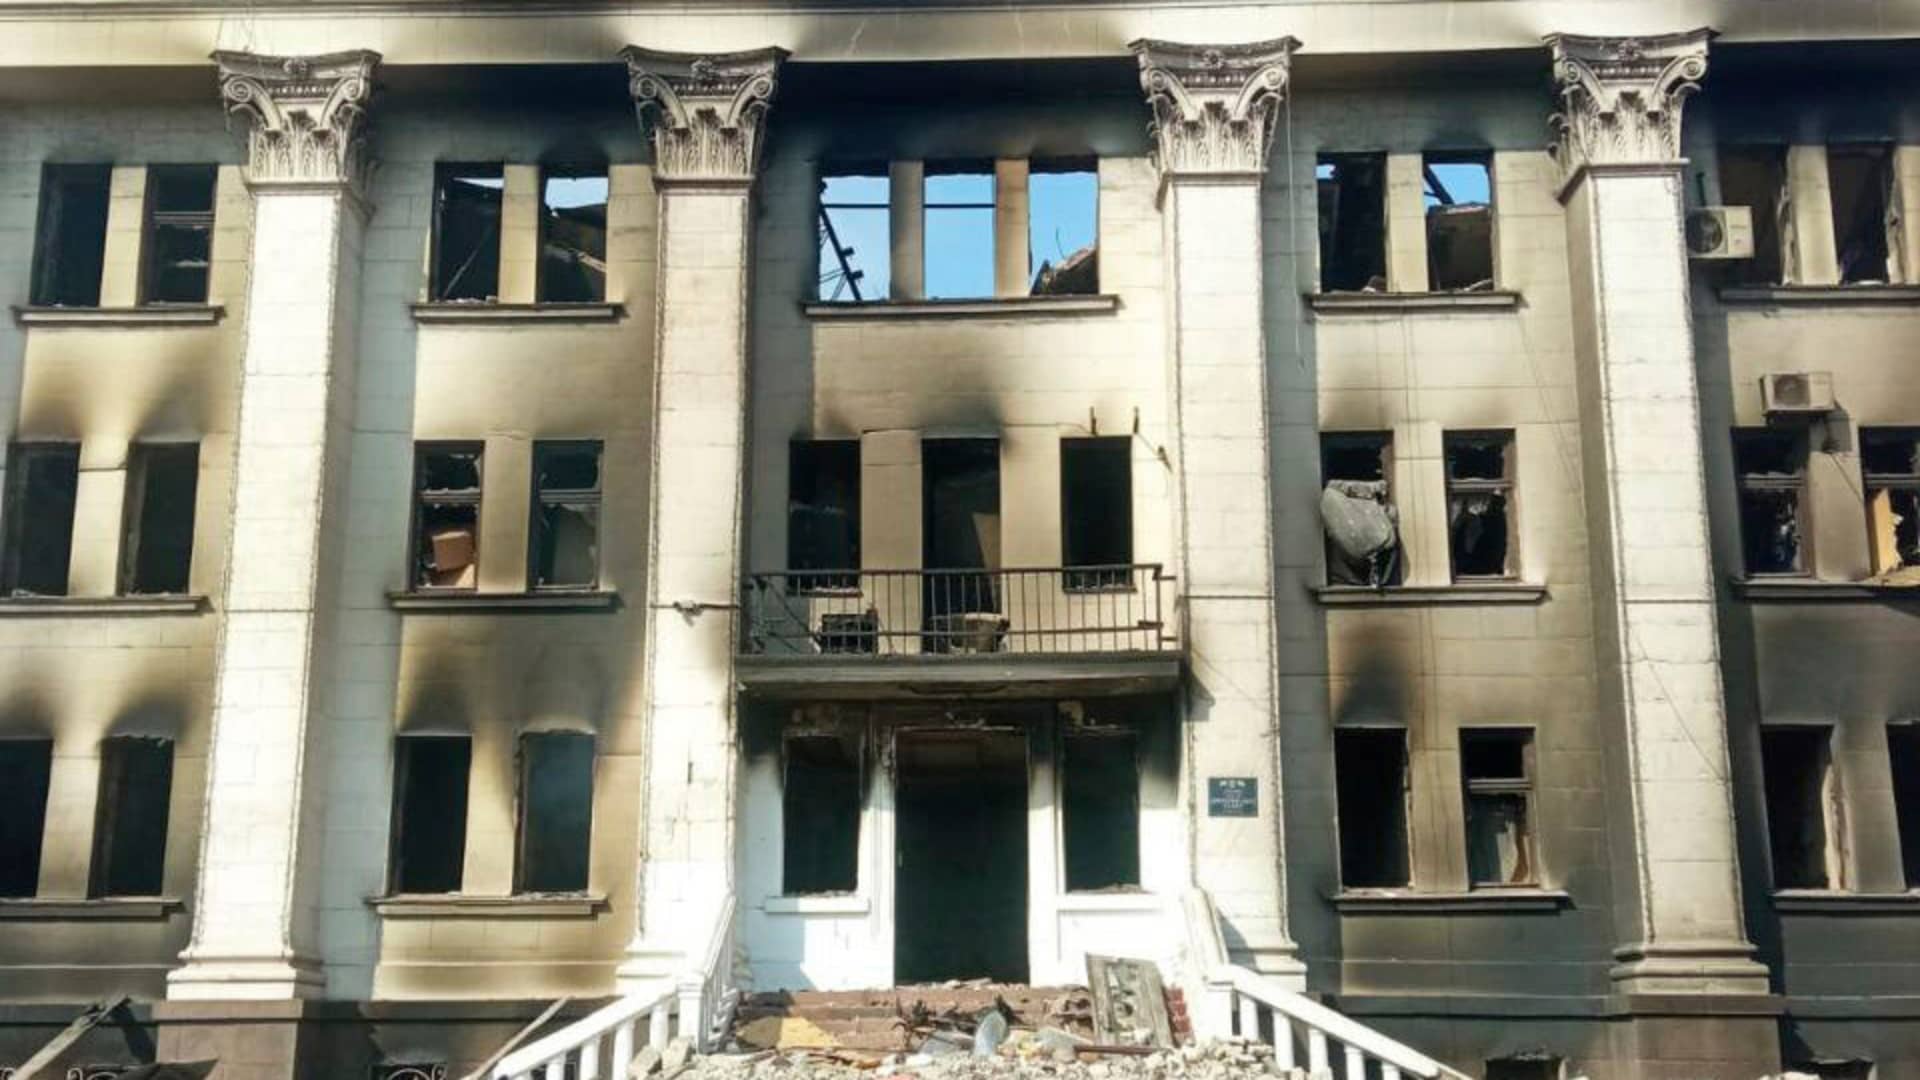 This image made available by Azov Battalion, shows the drama theater, damaged after shelling, in Mariupol, Ukraine, Thursday March 17, 2022. Rescuers are searching for survivors in the ruins of a theater ripped apart by Russian airstrikes.